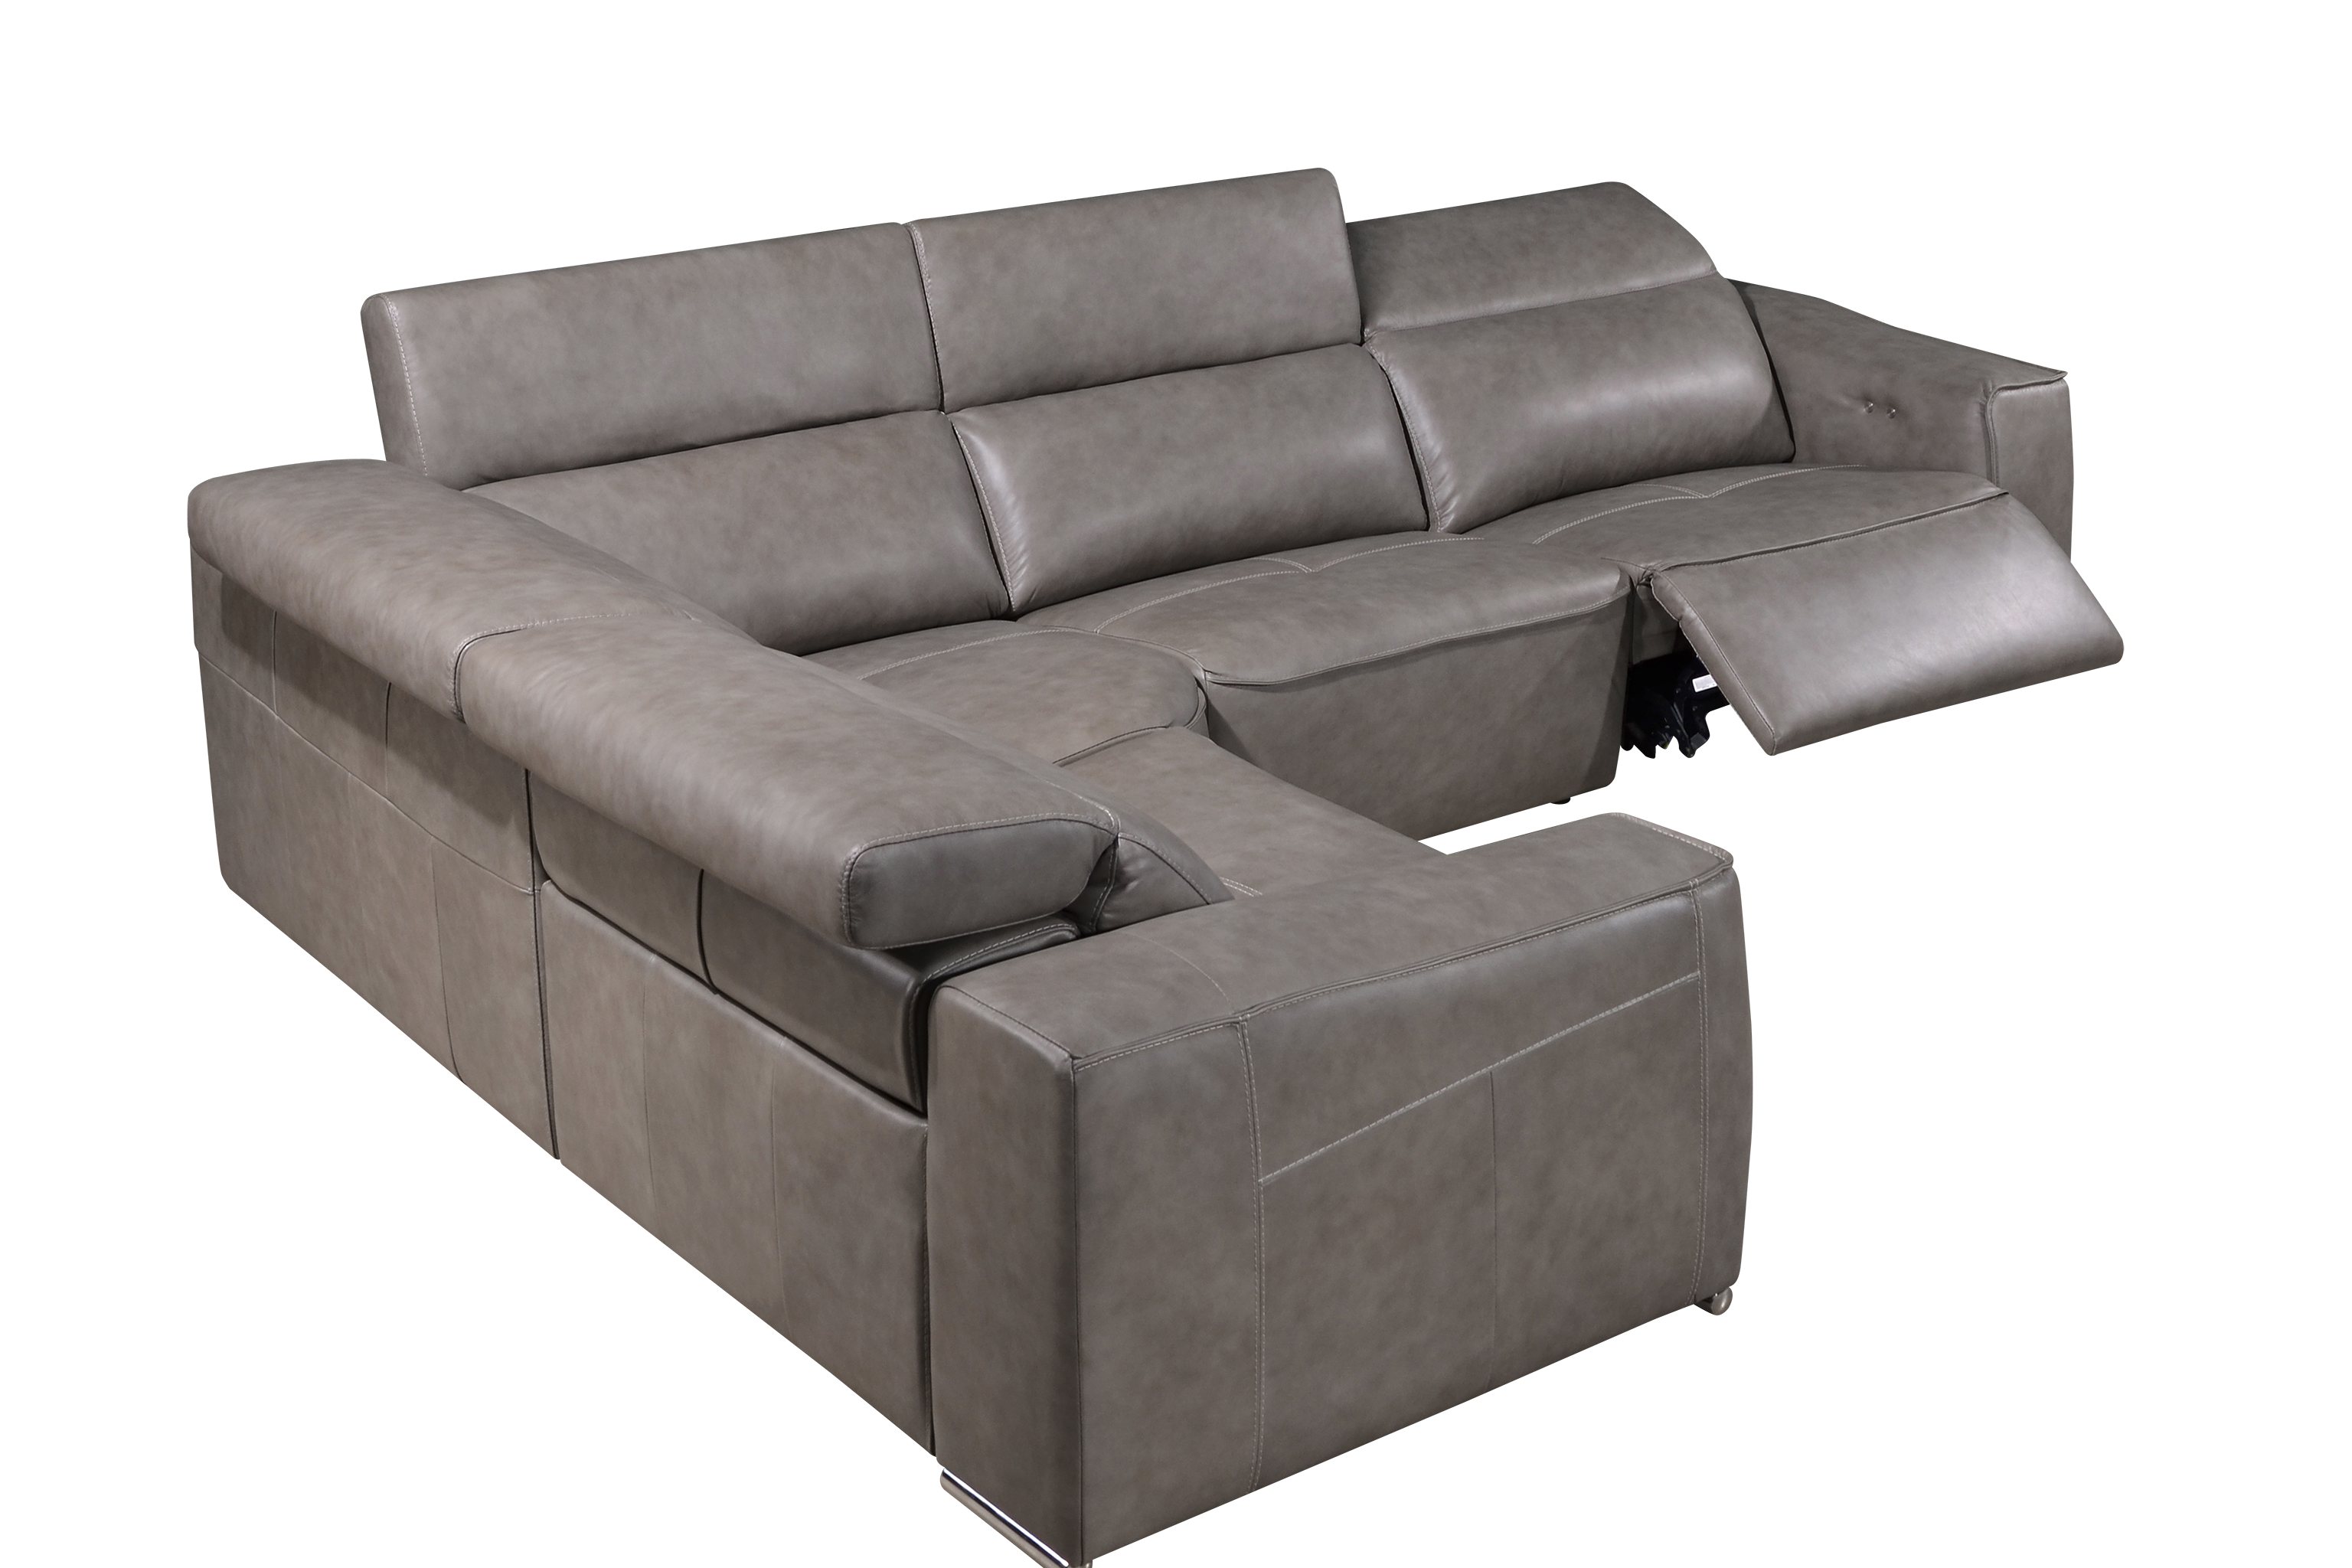 HENRIETTA Sectional Recliner Sofa in Leather by Castilla